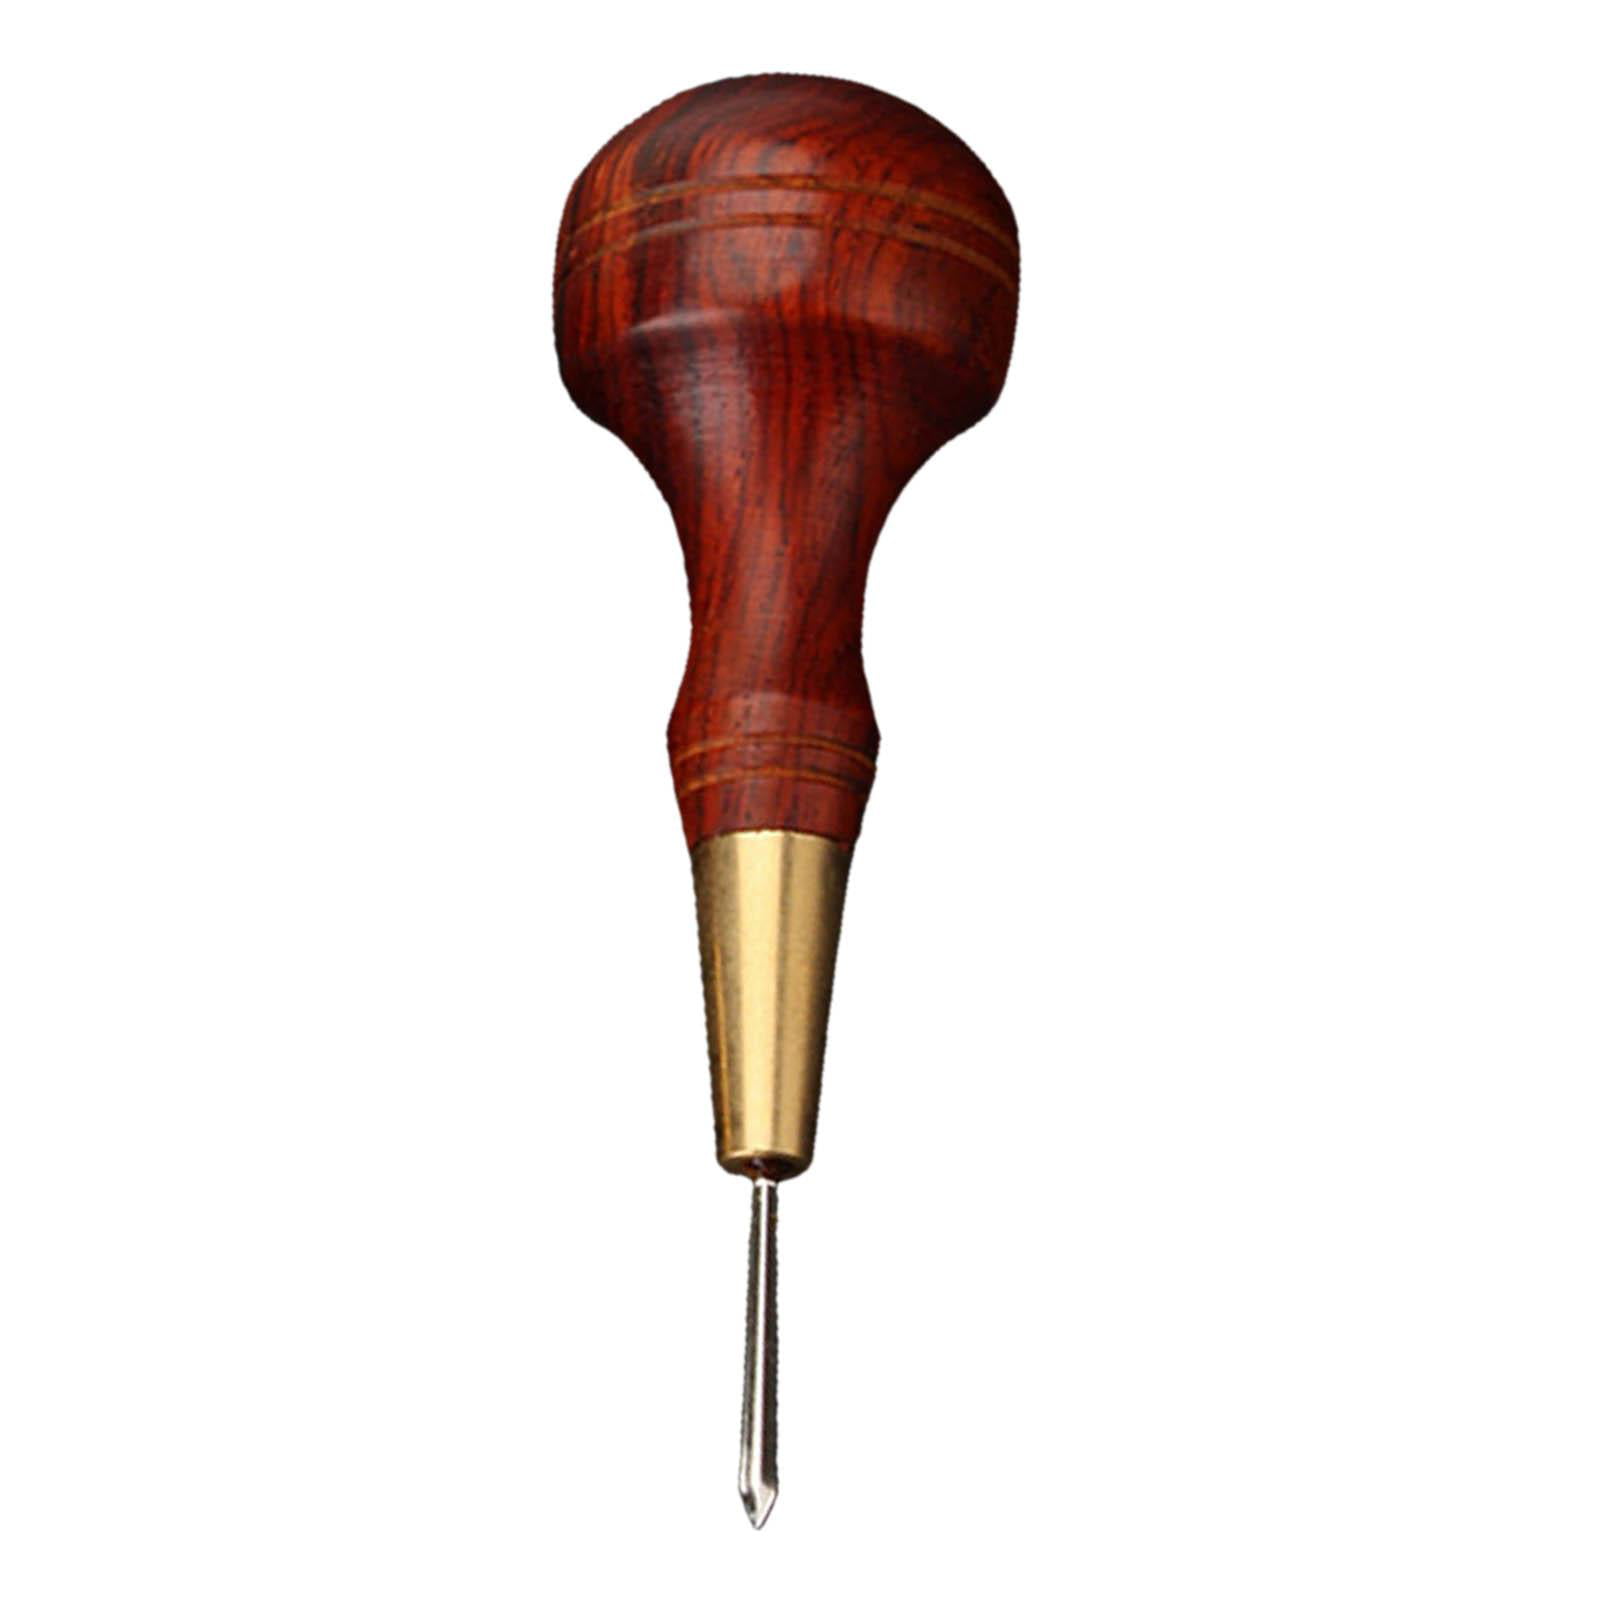 Speedy Drilling Wooden Craft Scratching Awl Thread - Pack of 3 - Heavy Duty  Pattern Leather Hole Small Bookbinding Wood Awl